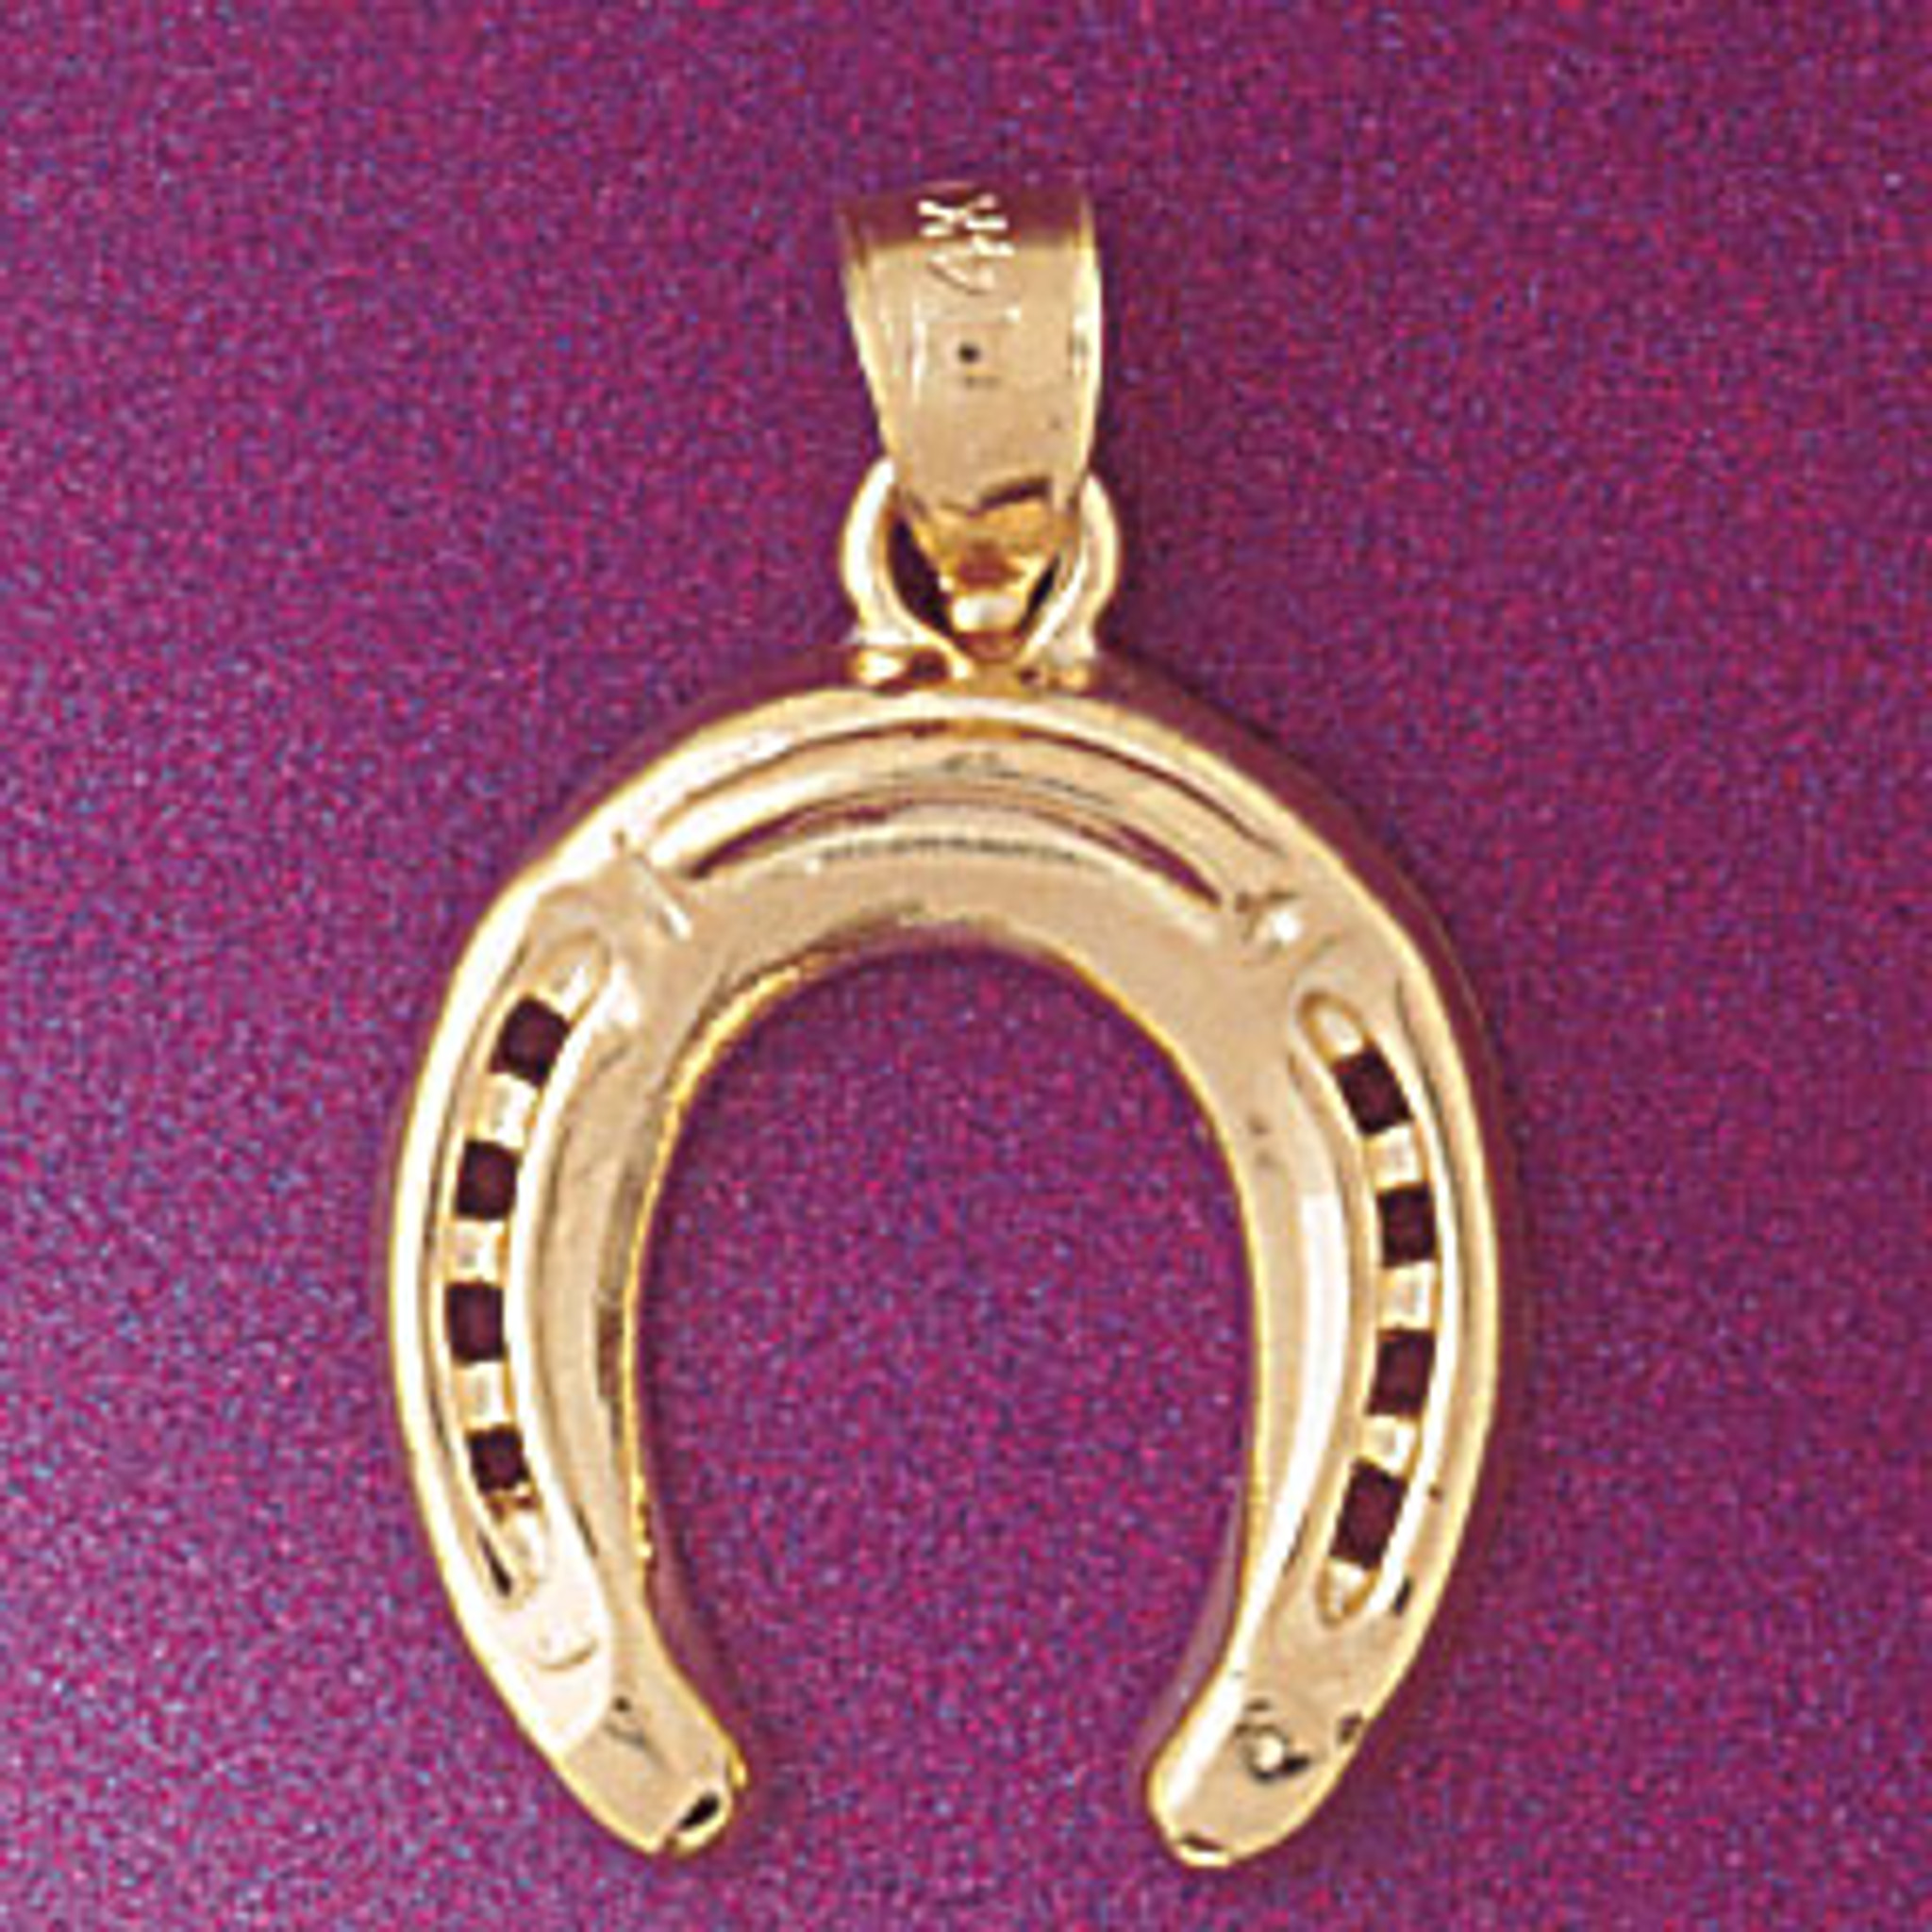 Lucky Horseshoe Horse Shoe .925 Solid Sterling Silver Charm Pendant MADE IN USA 